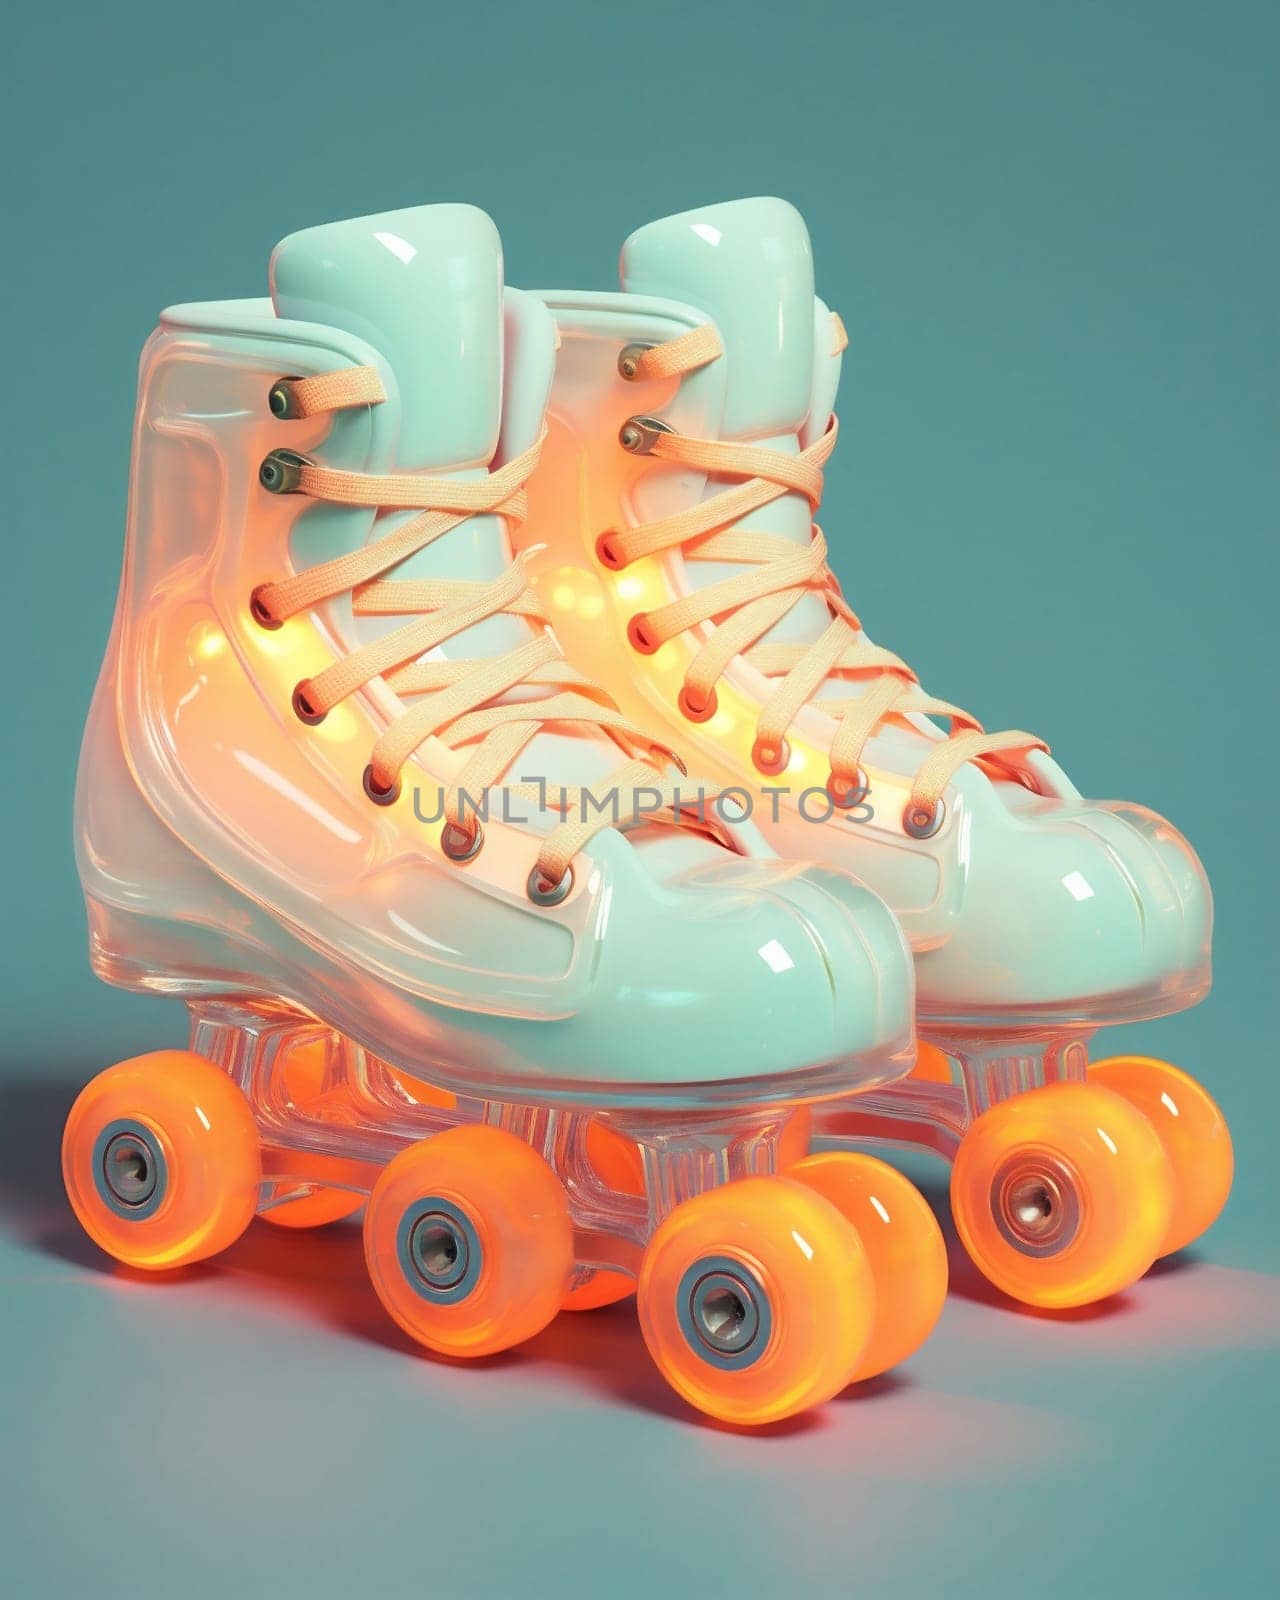 Fun style equipment vintage skater roller pair shoe fashion fitness pink retro summer skate active background leisure hobby sport